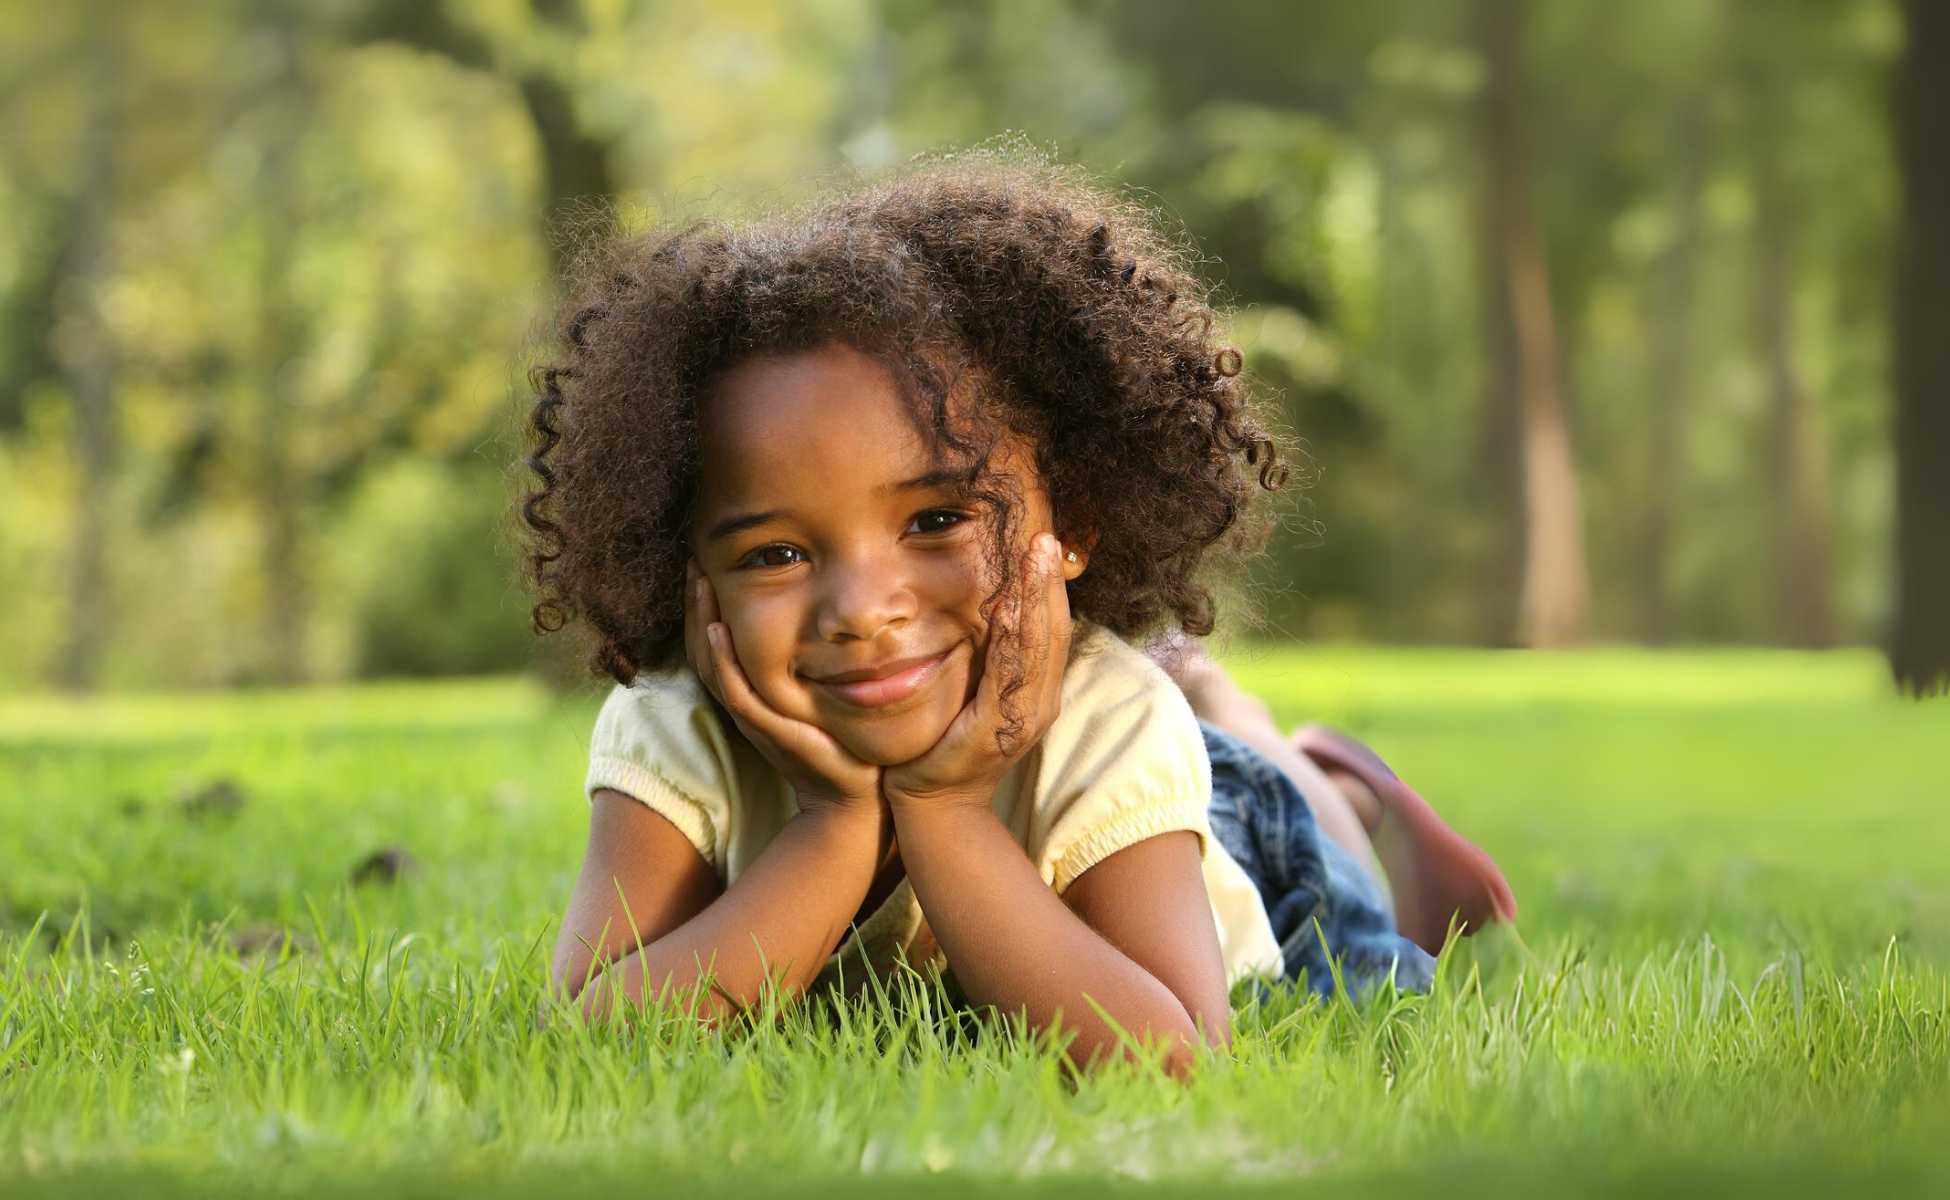 Smiling young girl lying in a field